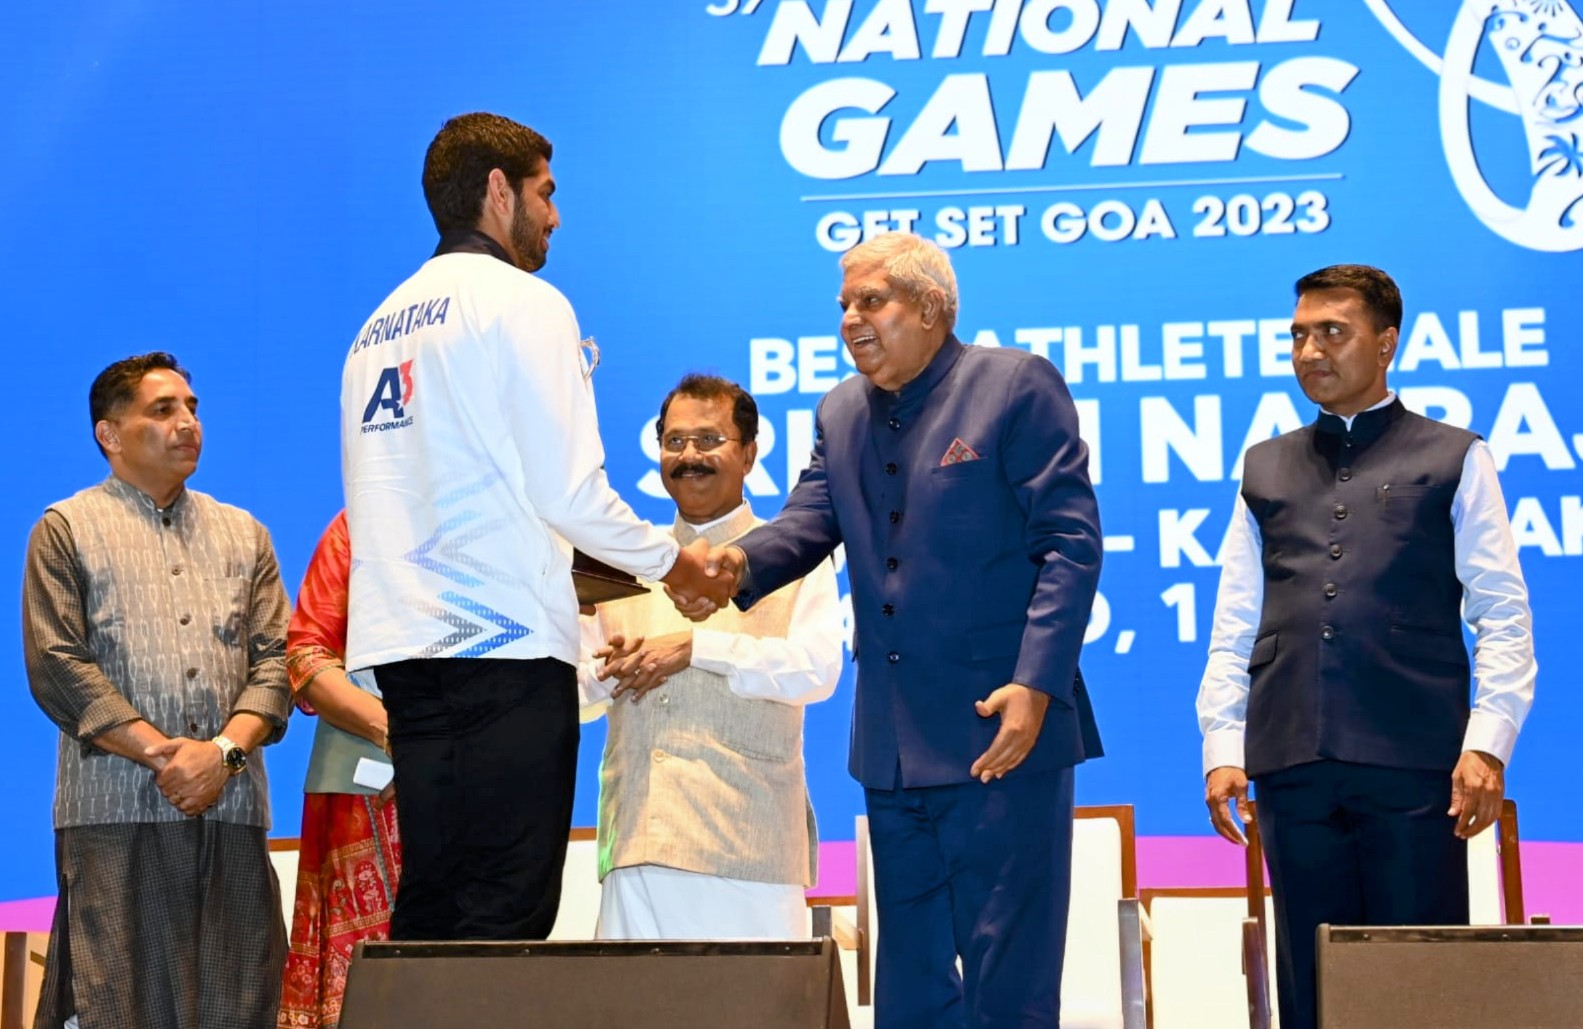 The Vice-President, Shri Jagdeep Dhankhar presenting awards to the best performers of 37th National Games in Goa on November 9, 2023.